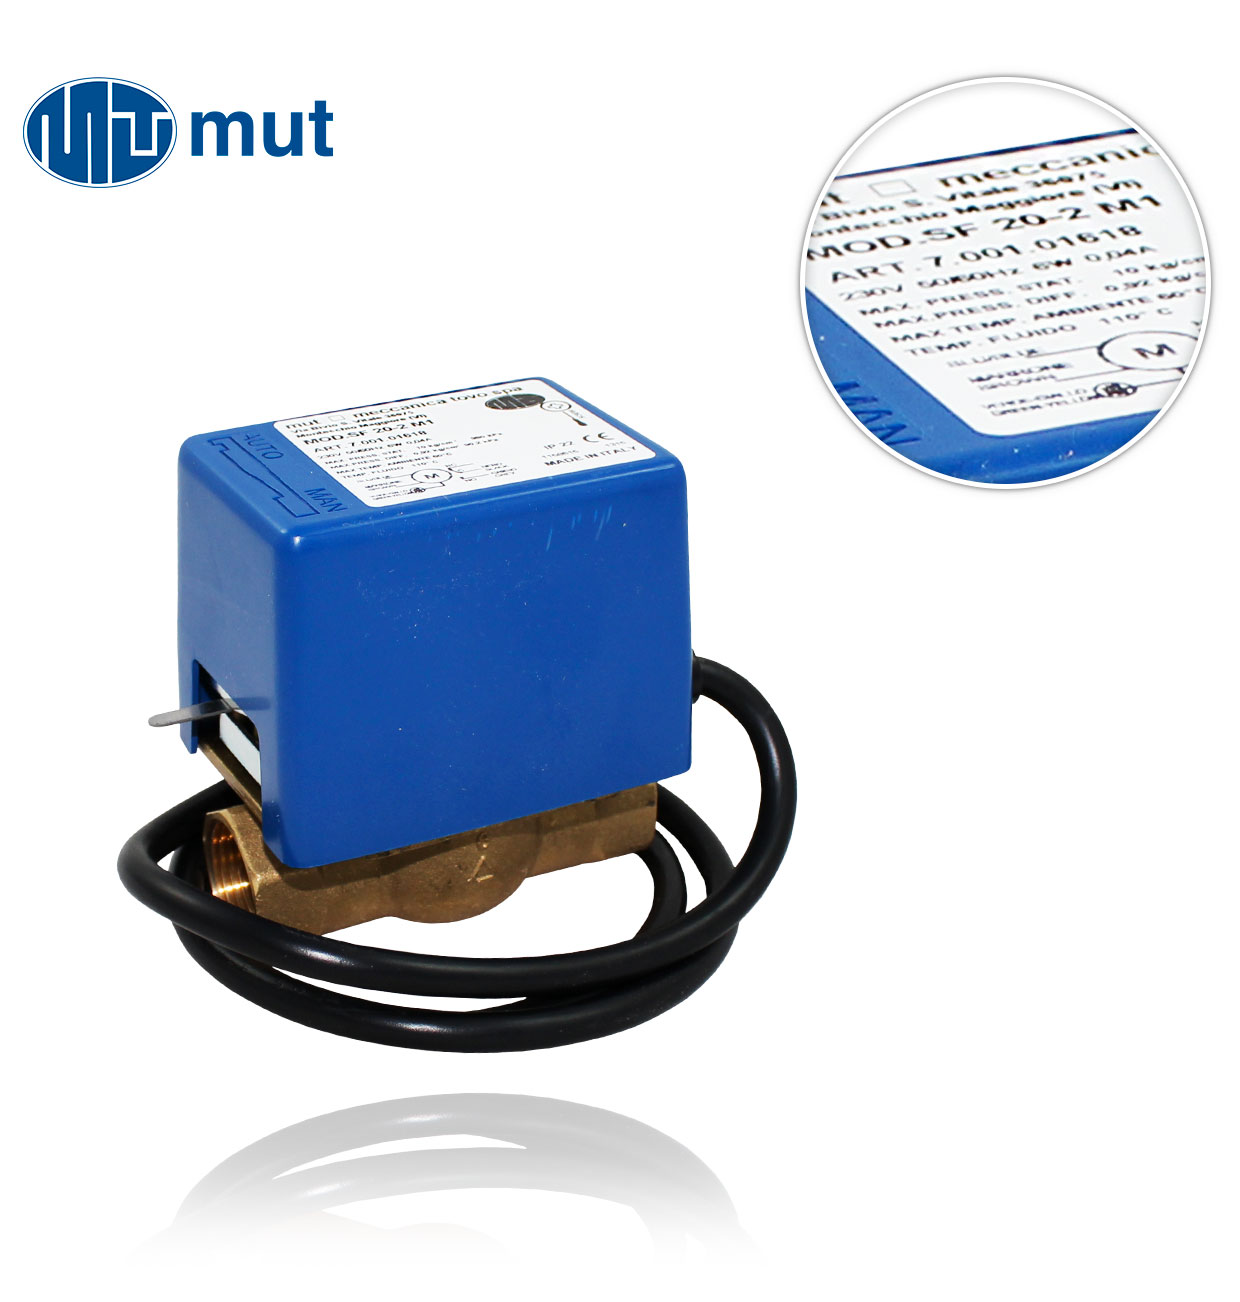 SF 20-2 M1 FF R3/4" 2-way MUT ZONE with 230V microswitch